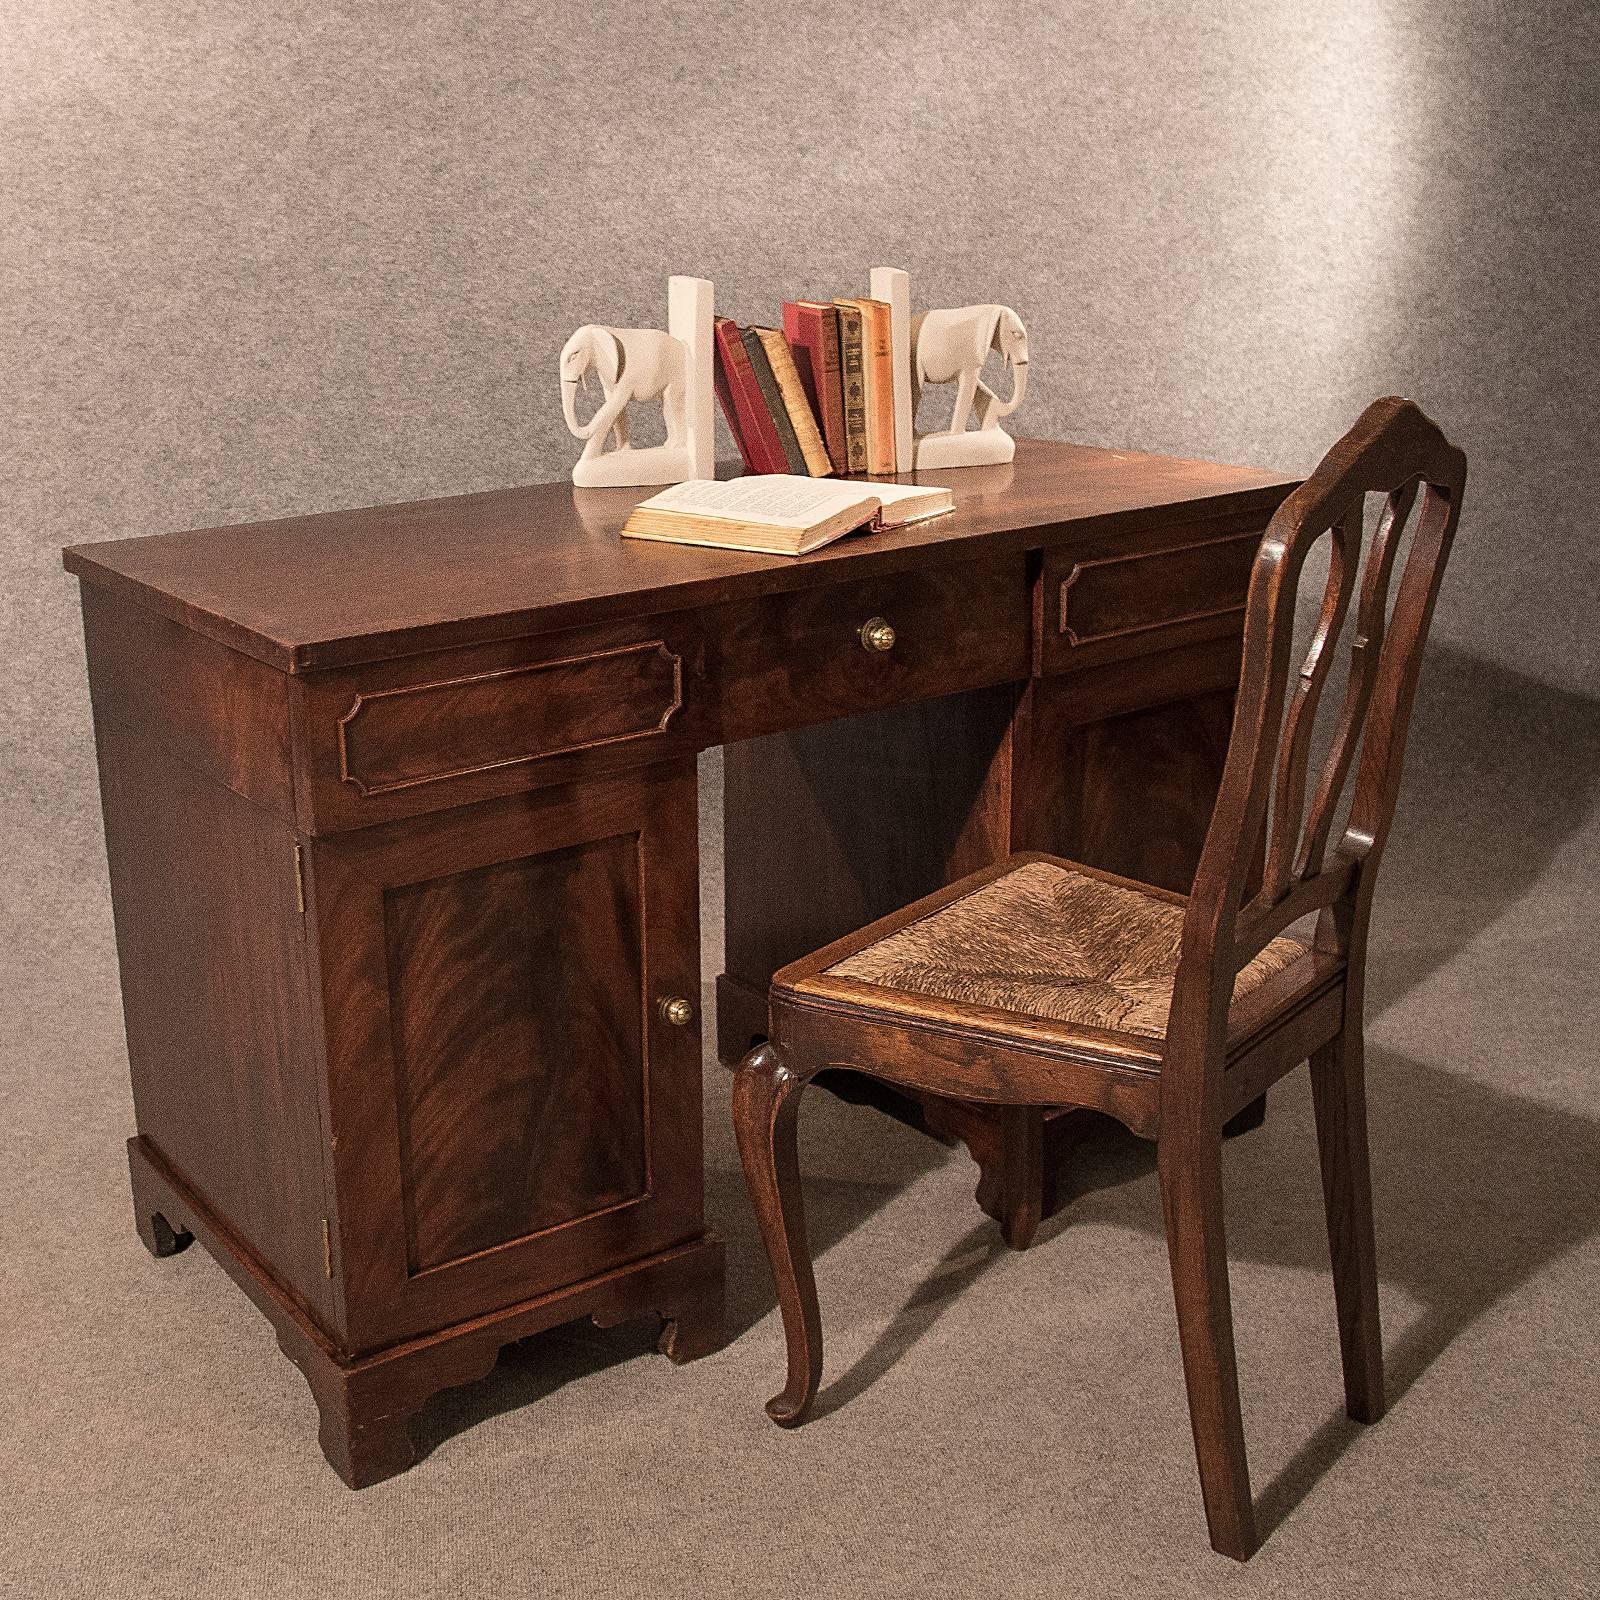 A charming English Victorian writing study desk presented in good antique condition
In mahogany with a very desirable aged tone
Stunning top showing wonderful mahogany grain and crossbanded perimeter
Rising from bracket feet
Twin cabinet doors